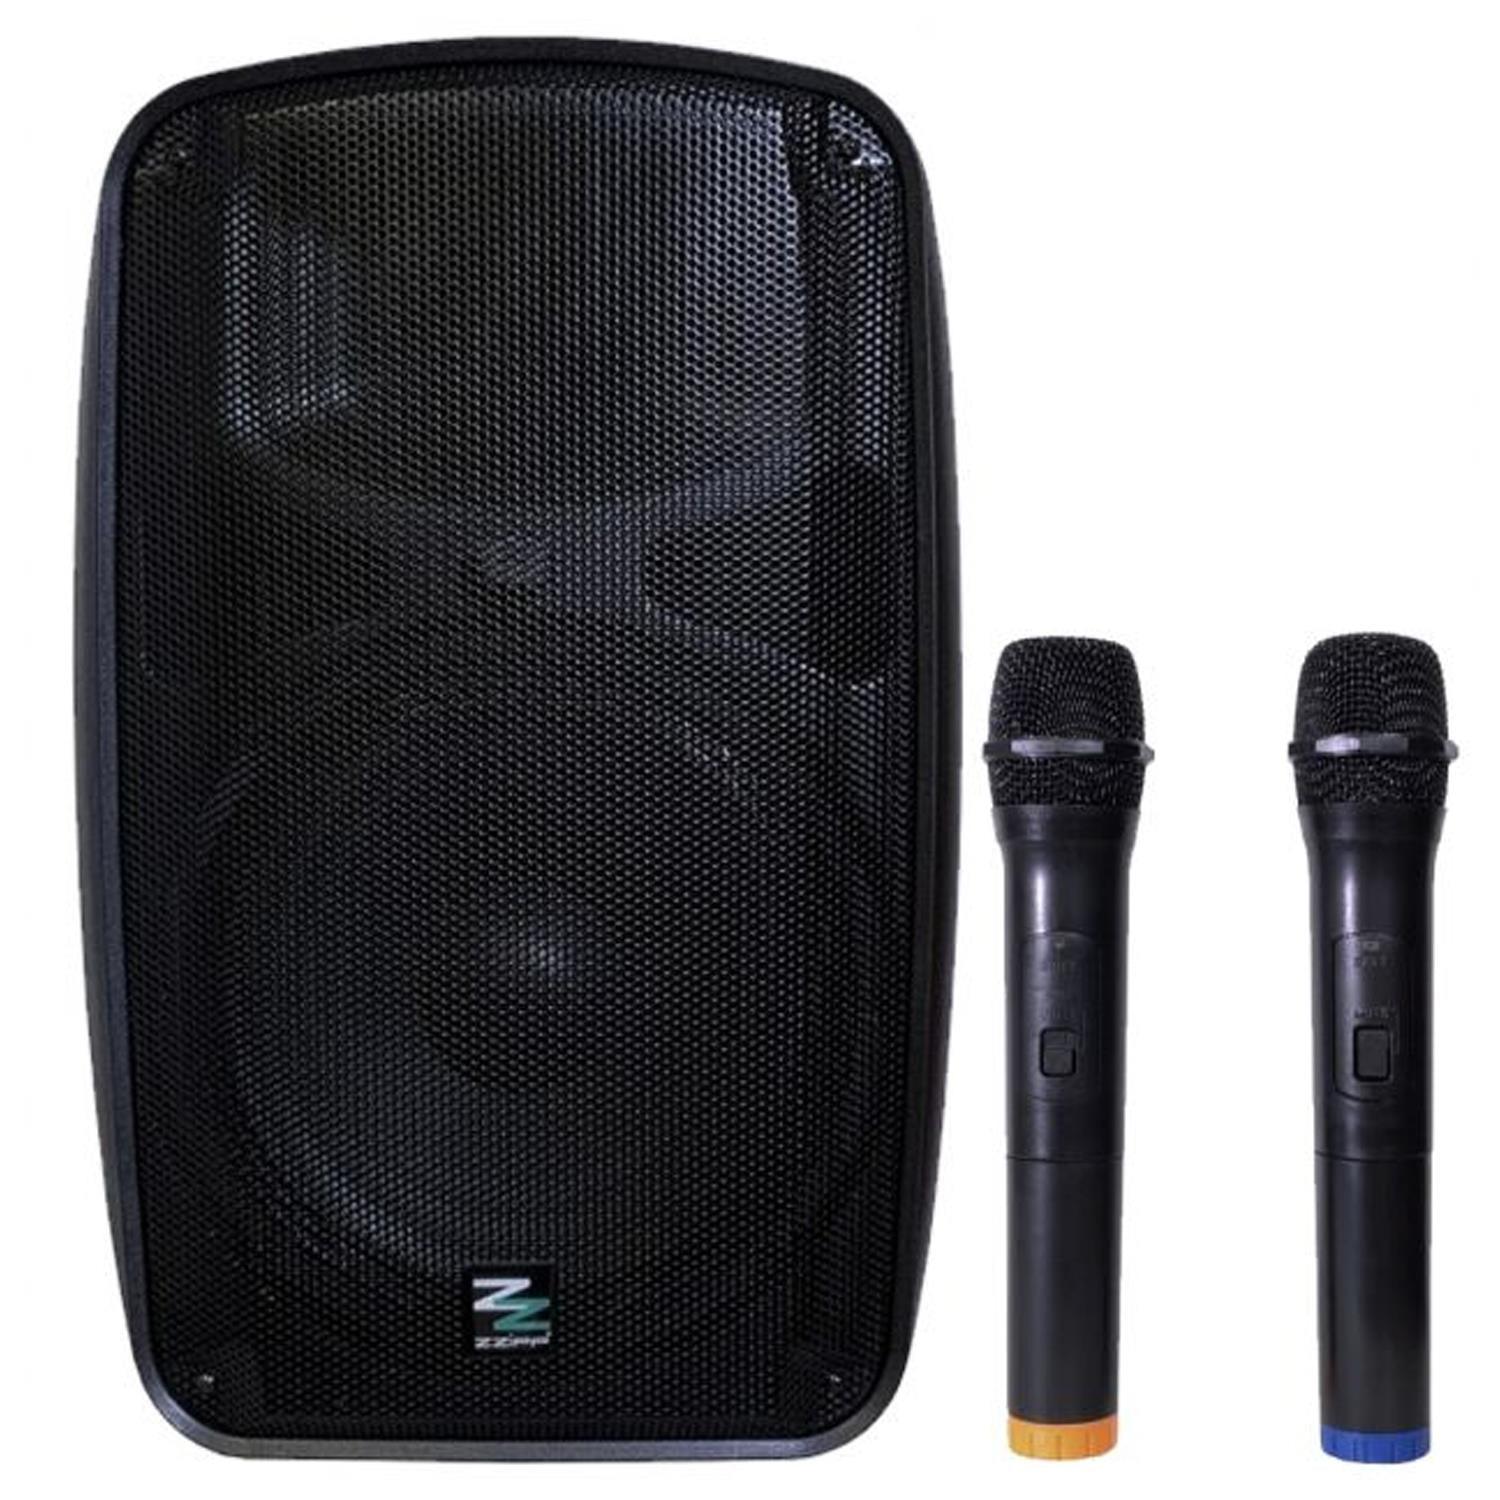 ZZiPP ZZPB115 15" Battery Powered Portable PA System with Mic - DY Pro Audio